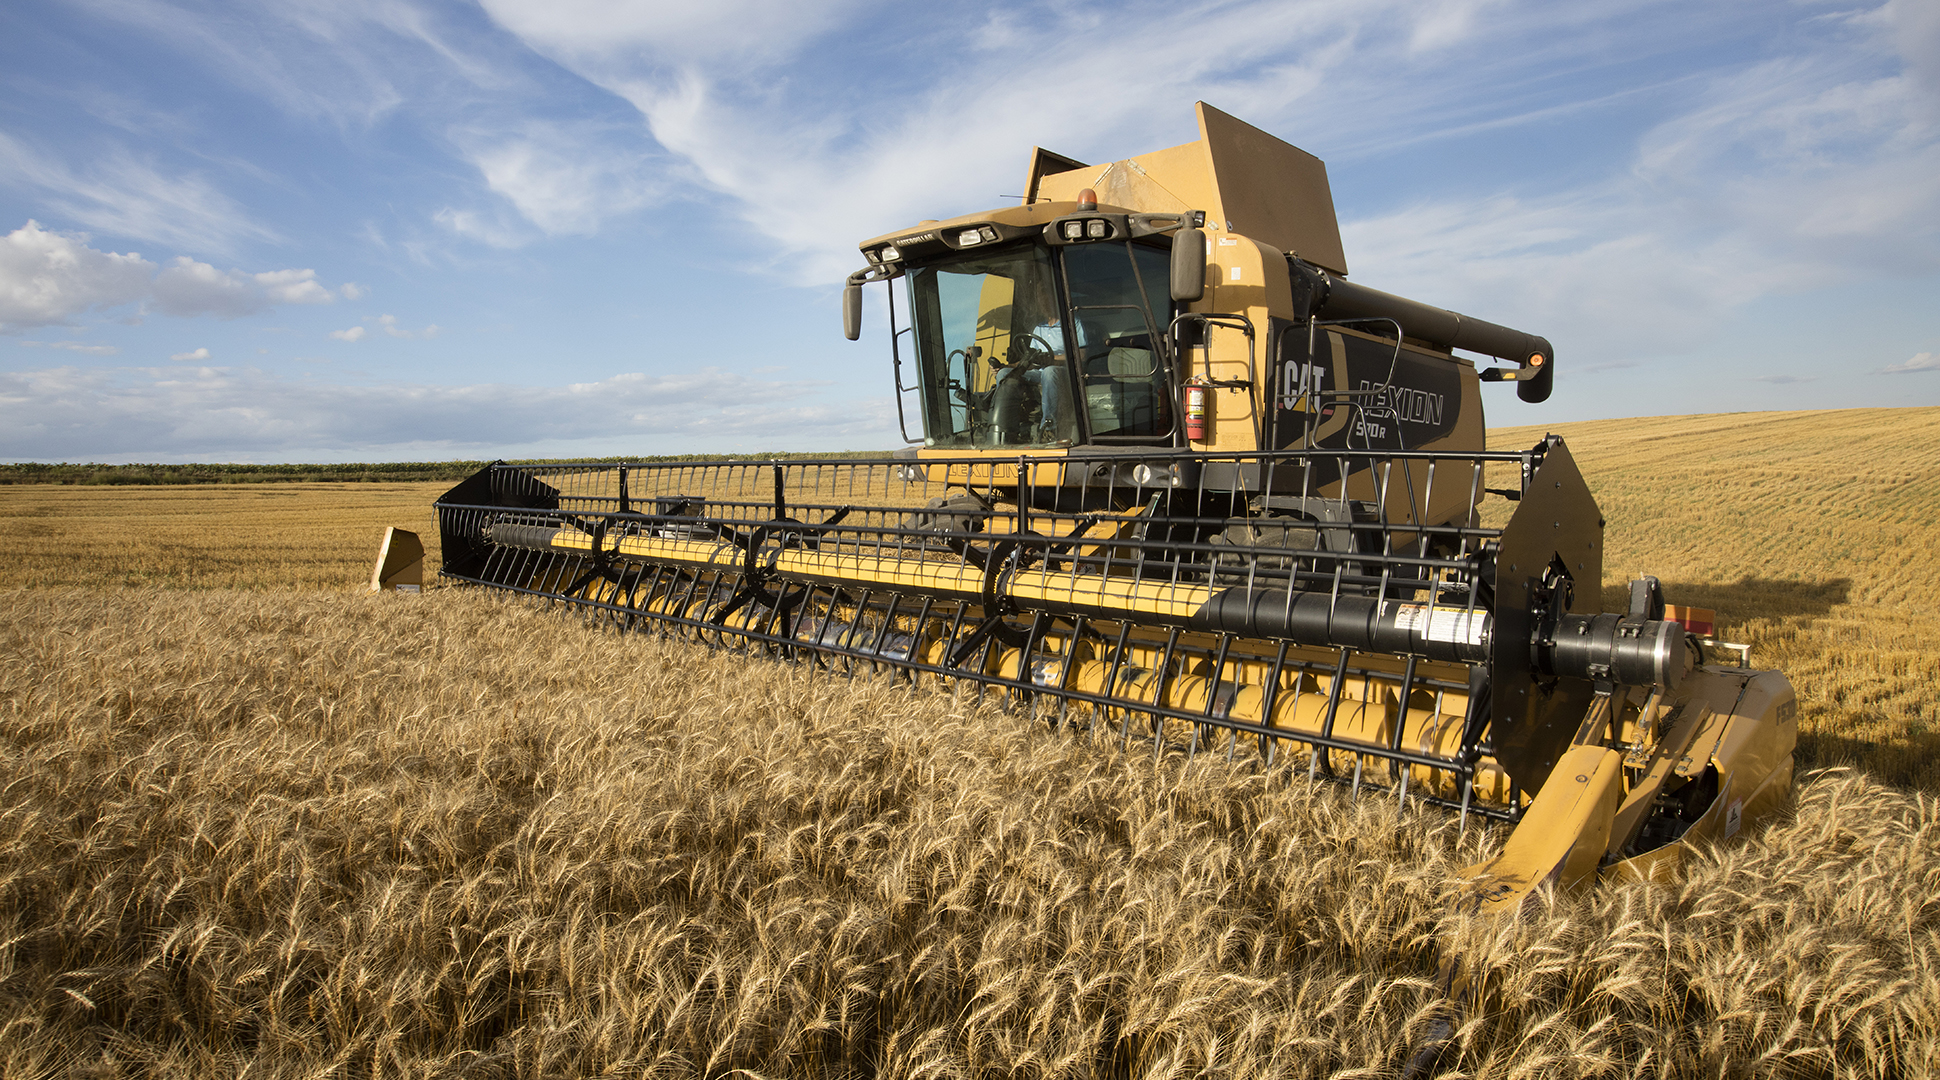 How does a combine work?